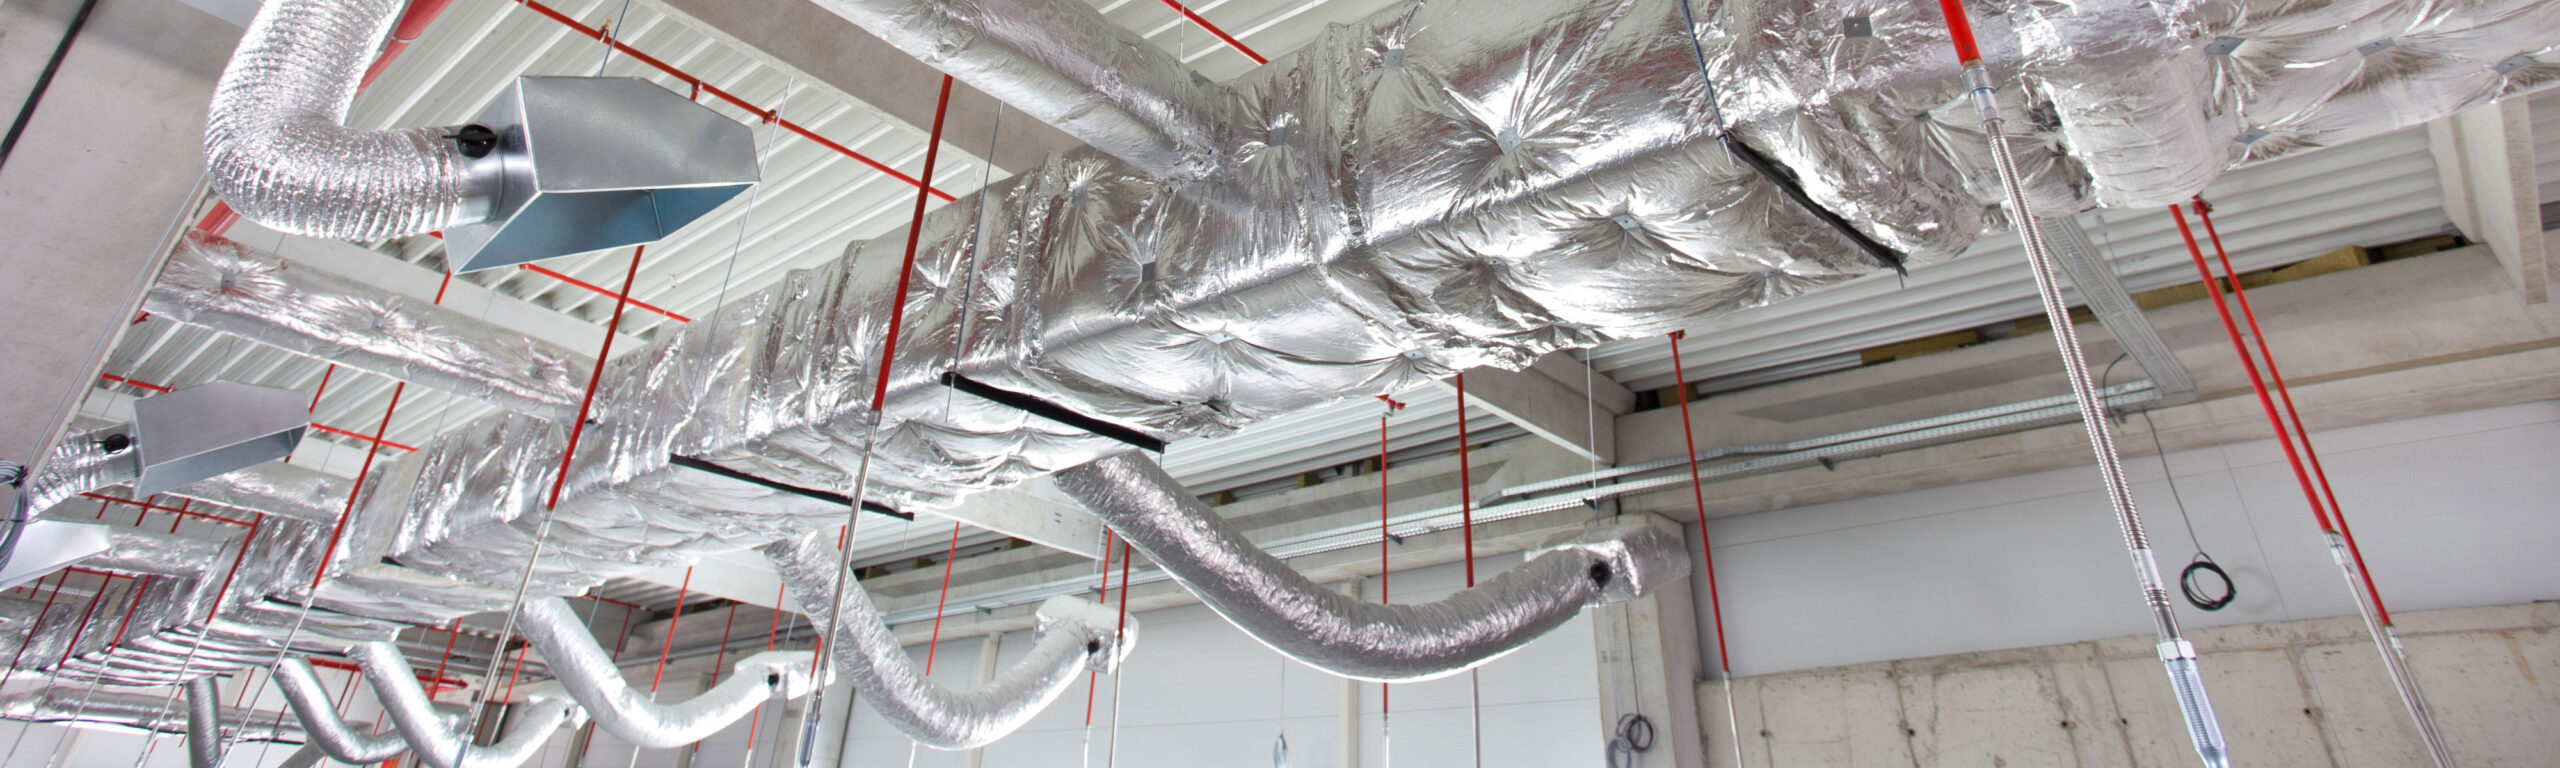 Millcreek Air Duct Cleaning